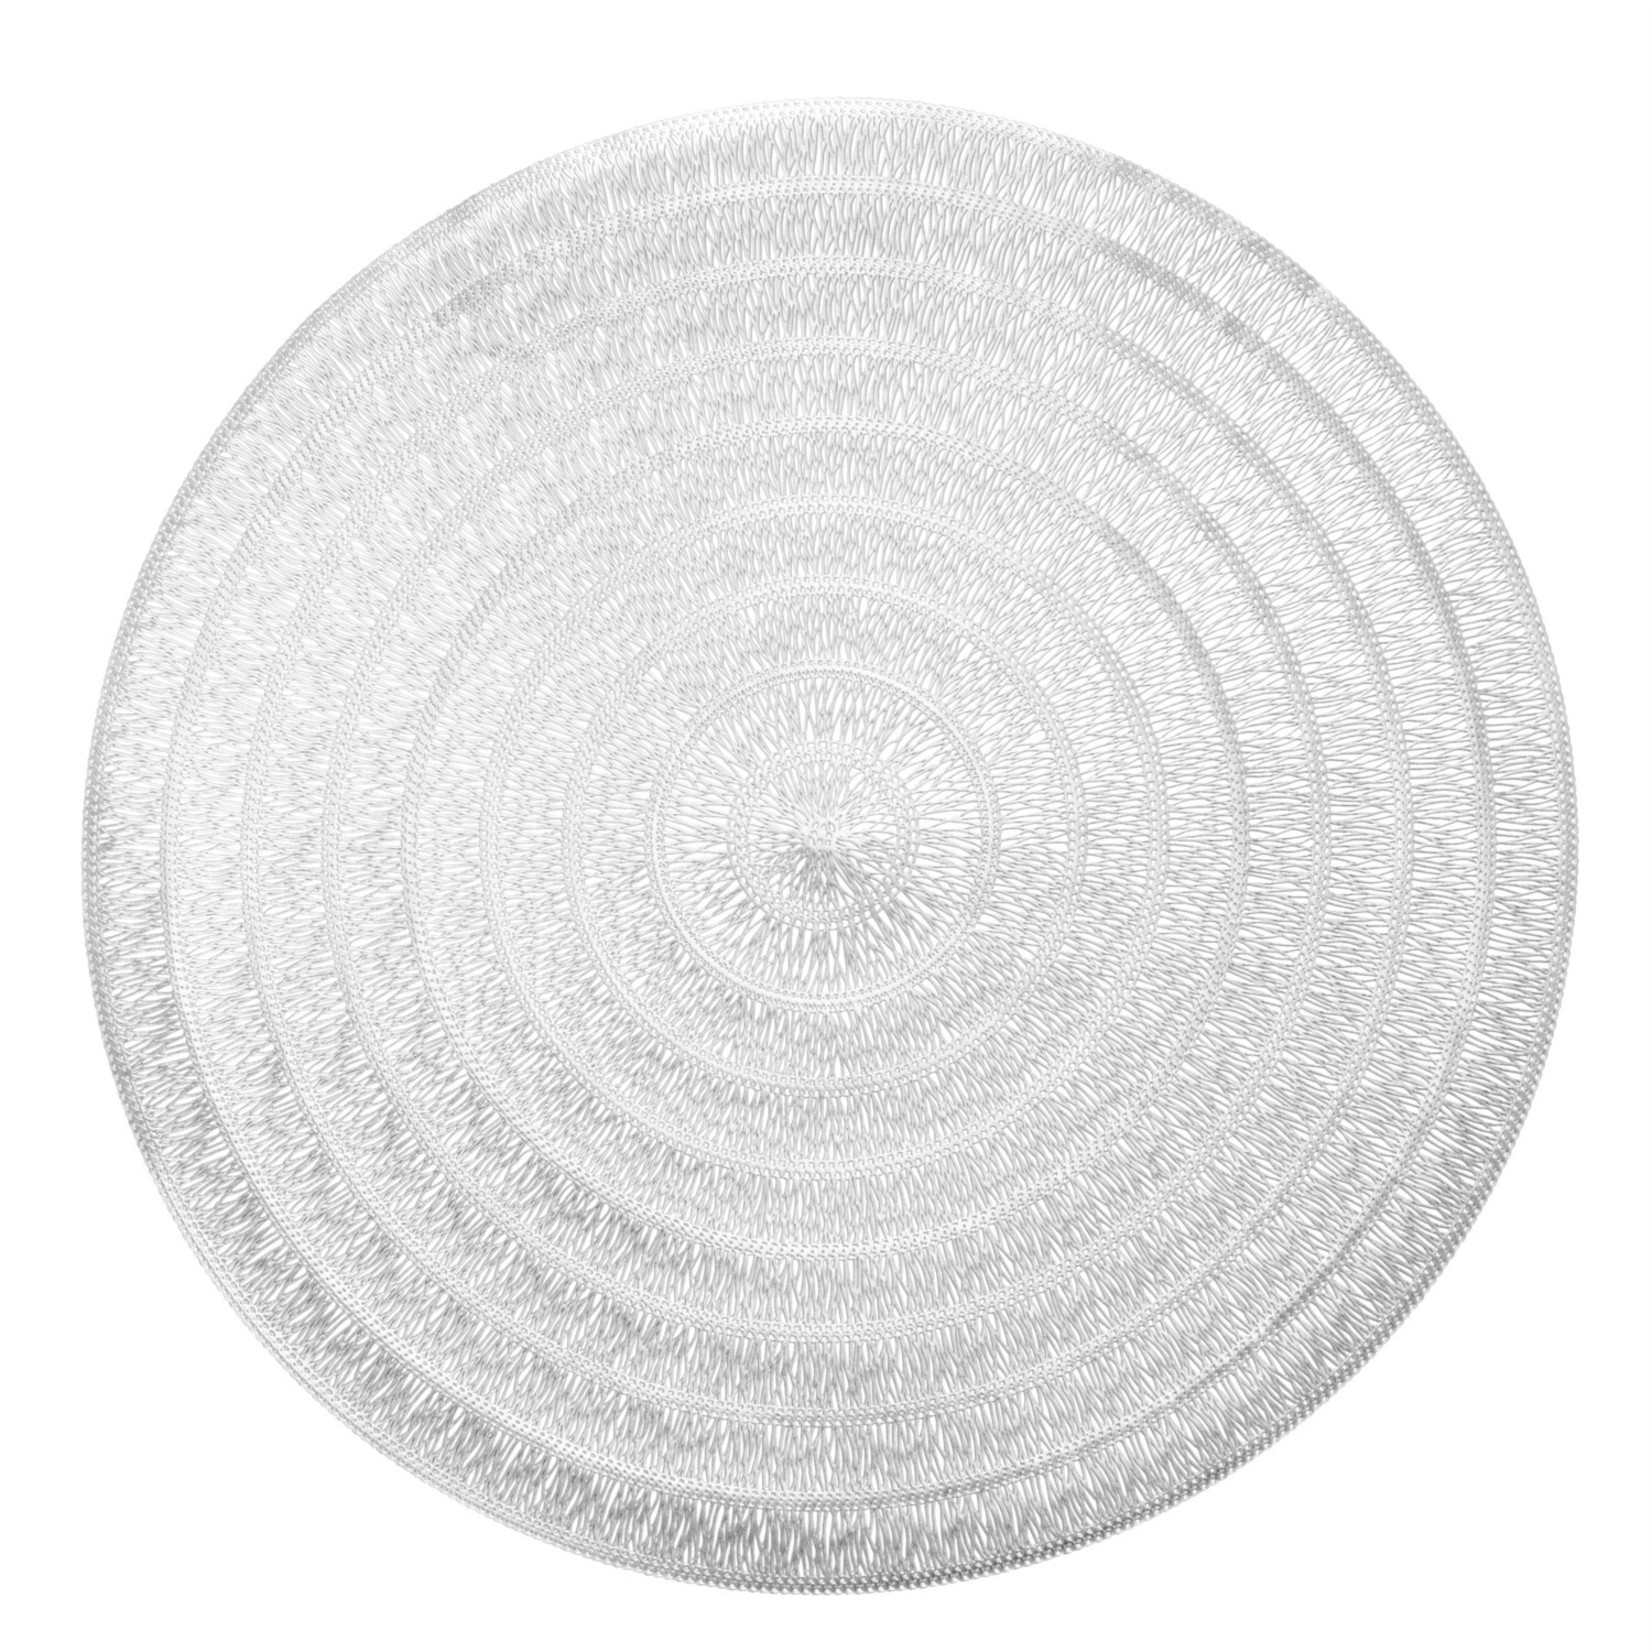 15" SILVER ROUND PLACEMAT, reg $3.99